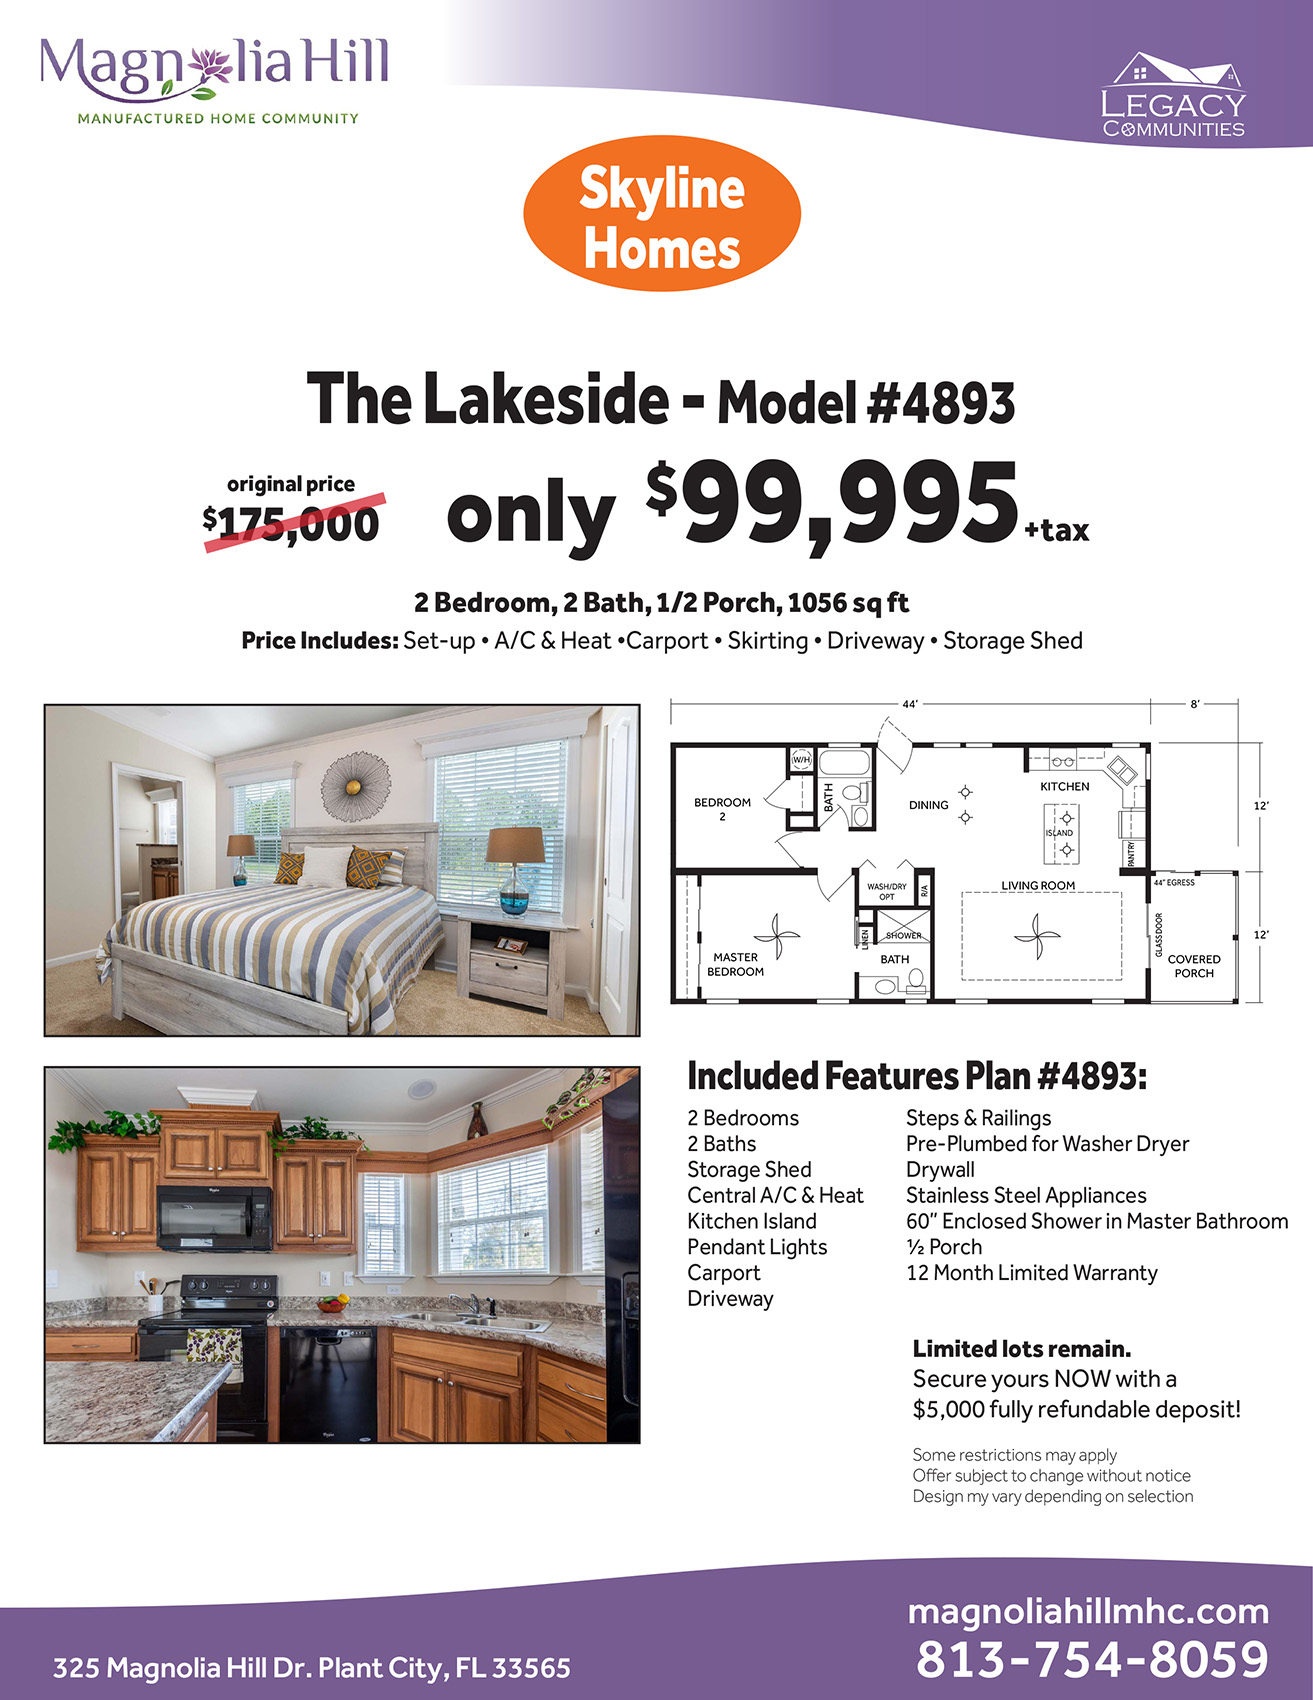 listing flyer for Magnolia Hill, The-Lakeside 4893